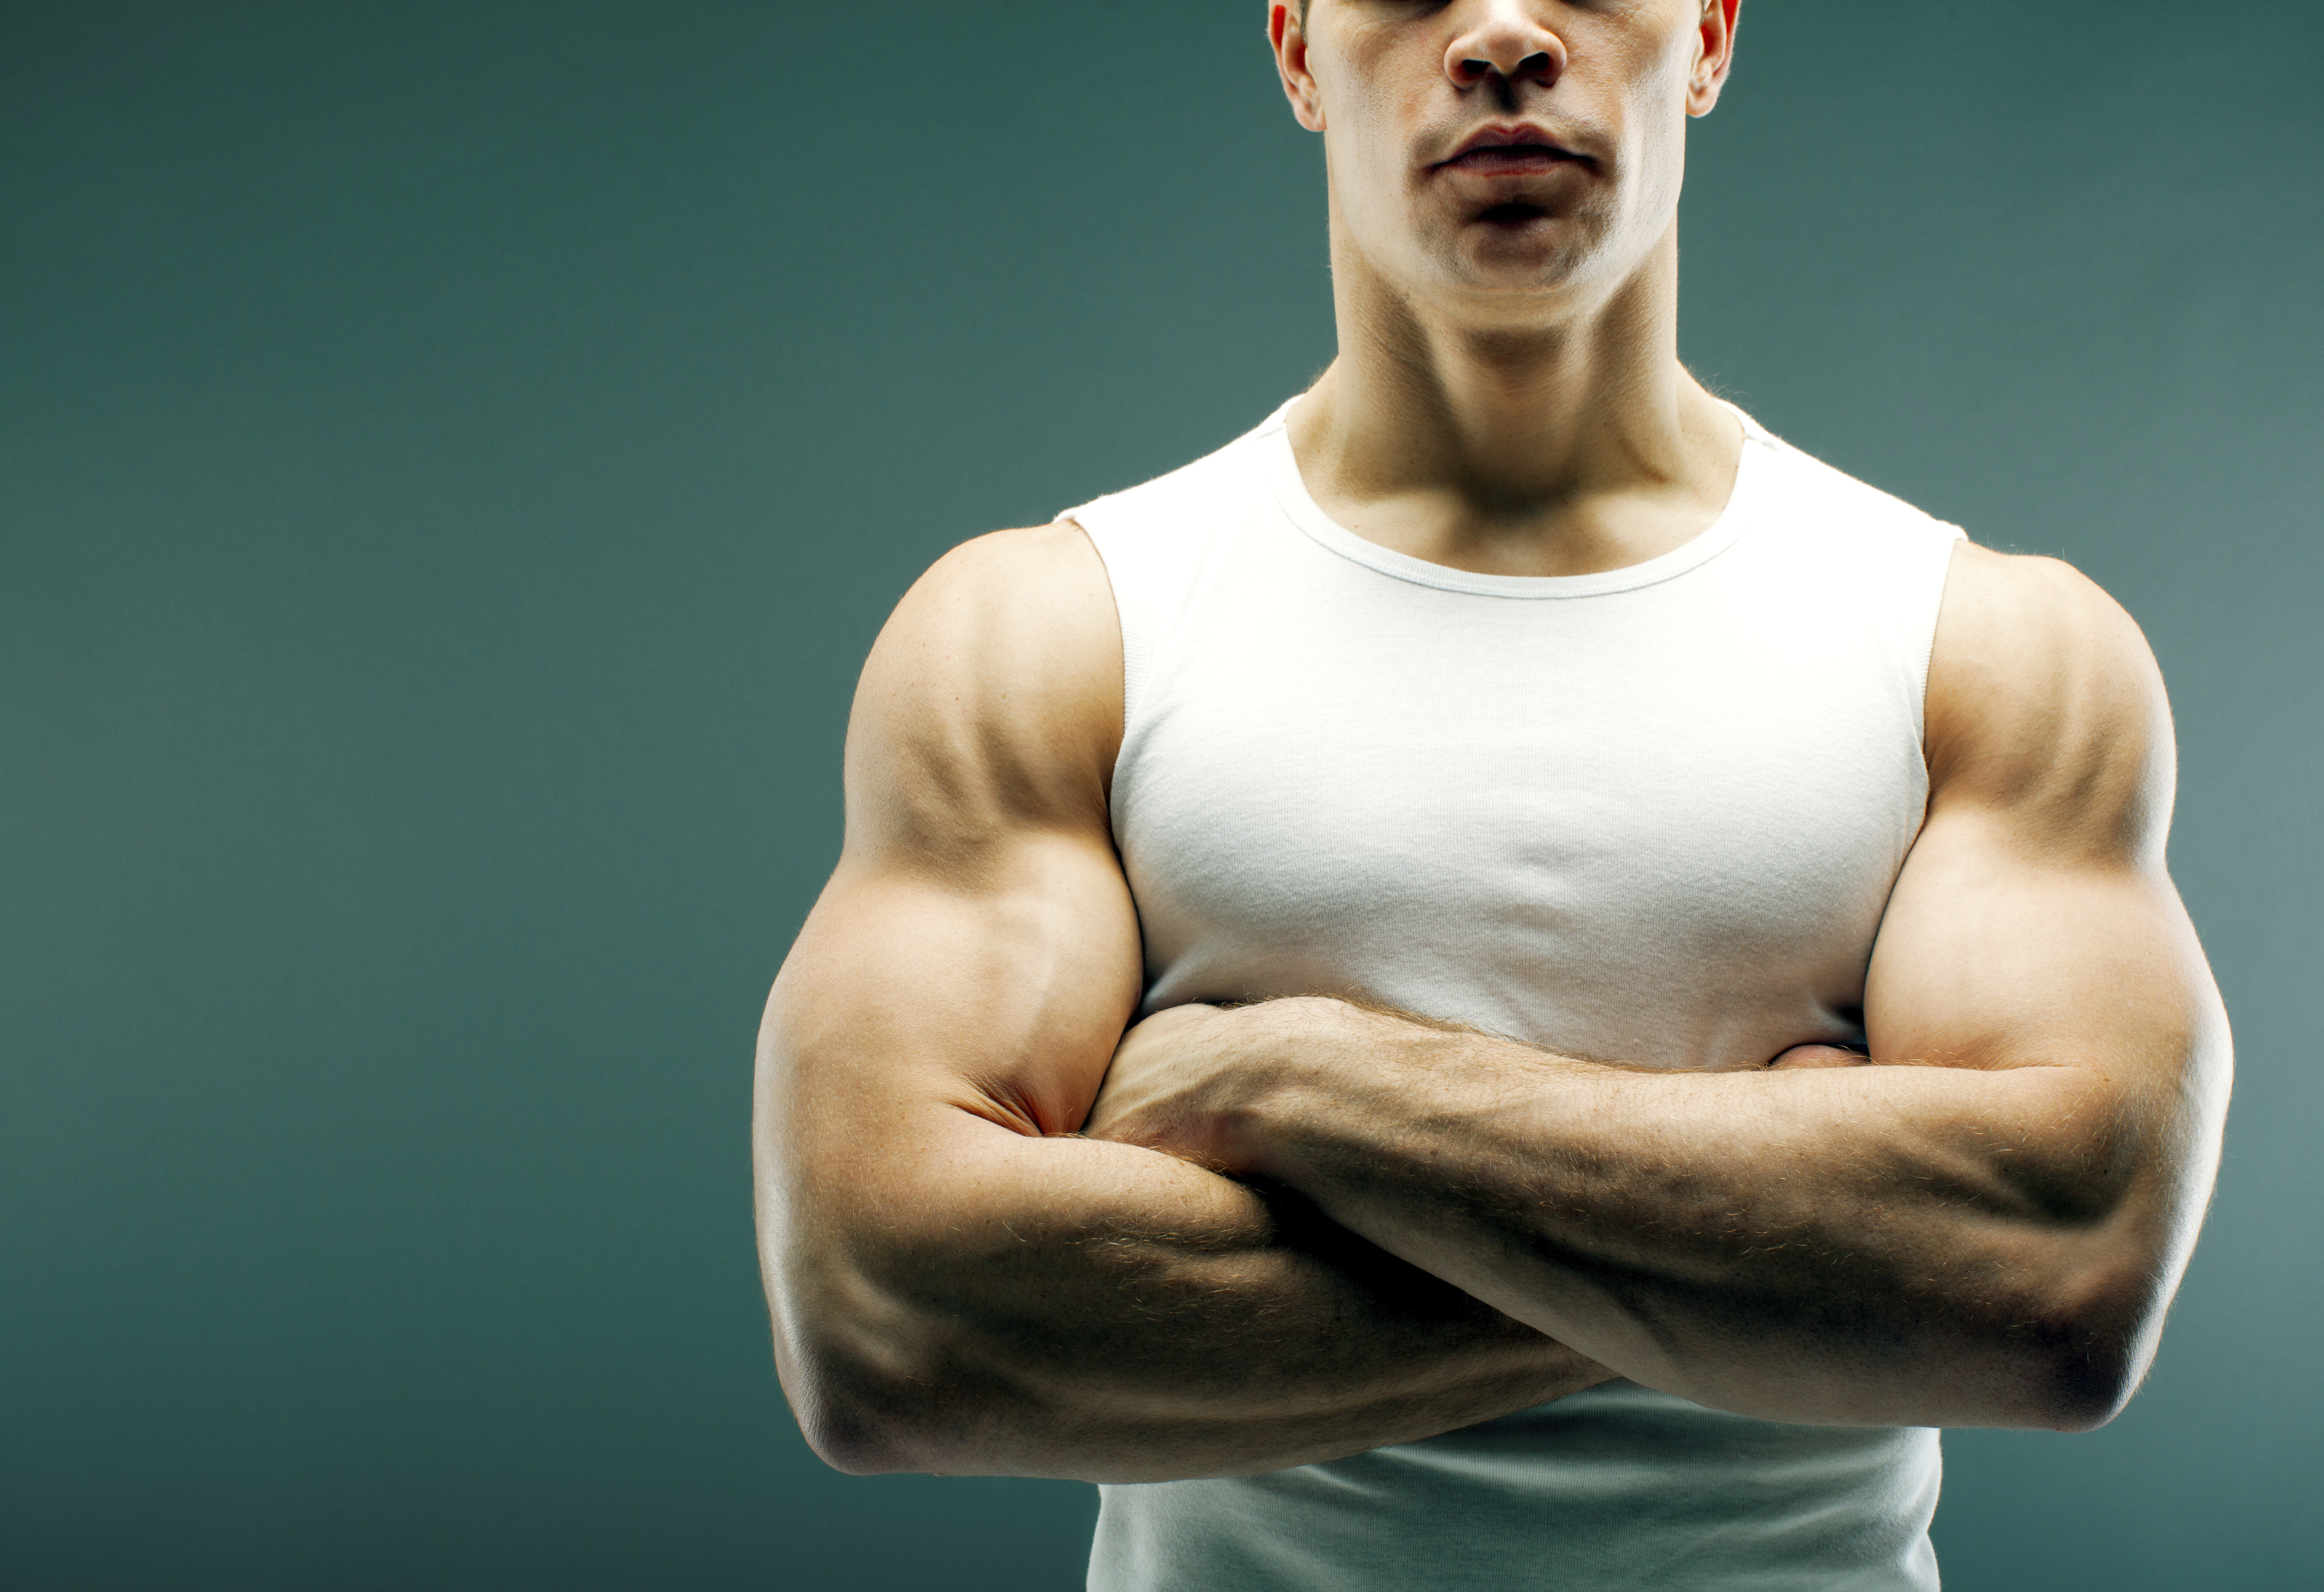 What Steroid Does To Your Body